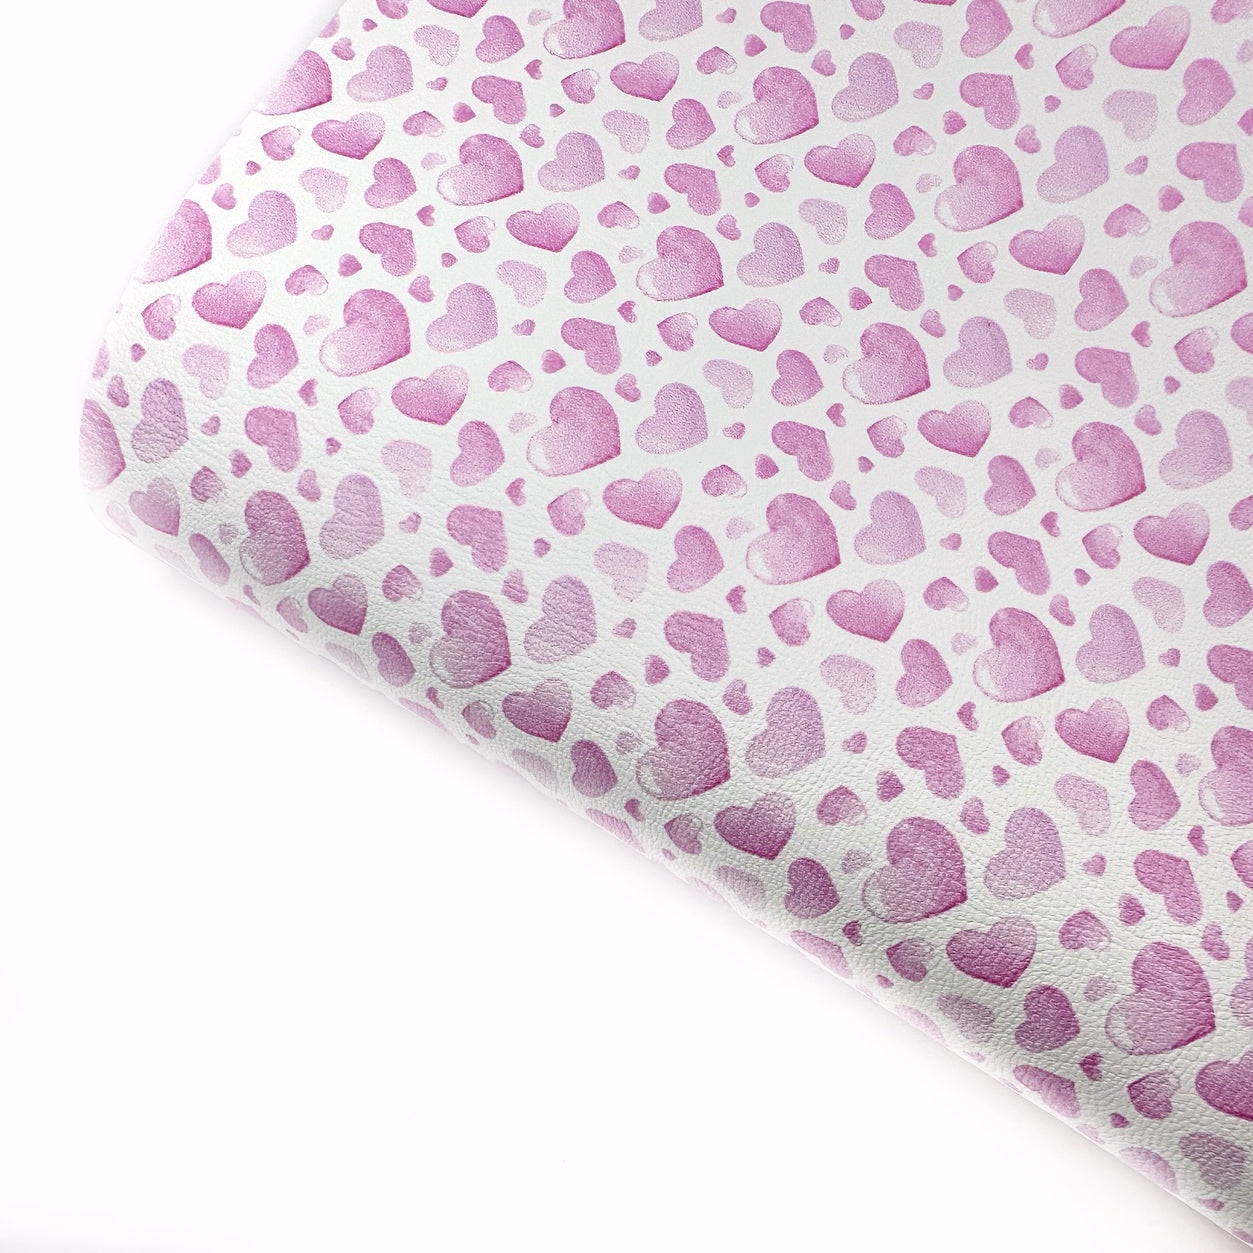 Love Hearts Pink Premium Faux Leather Fabric Sheets